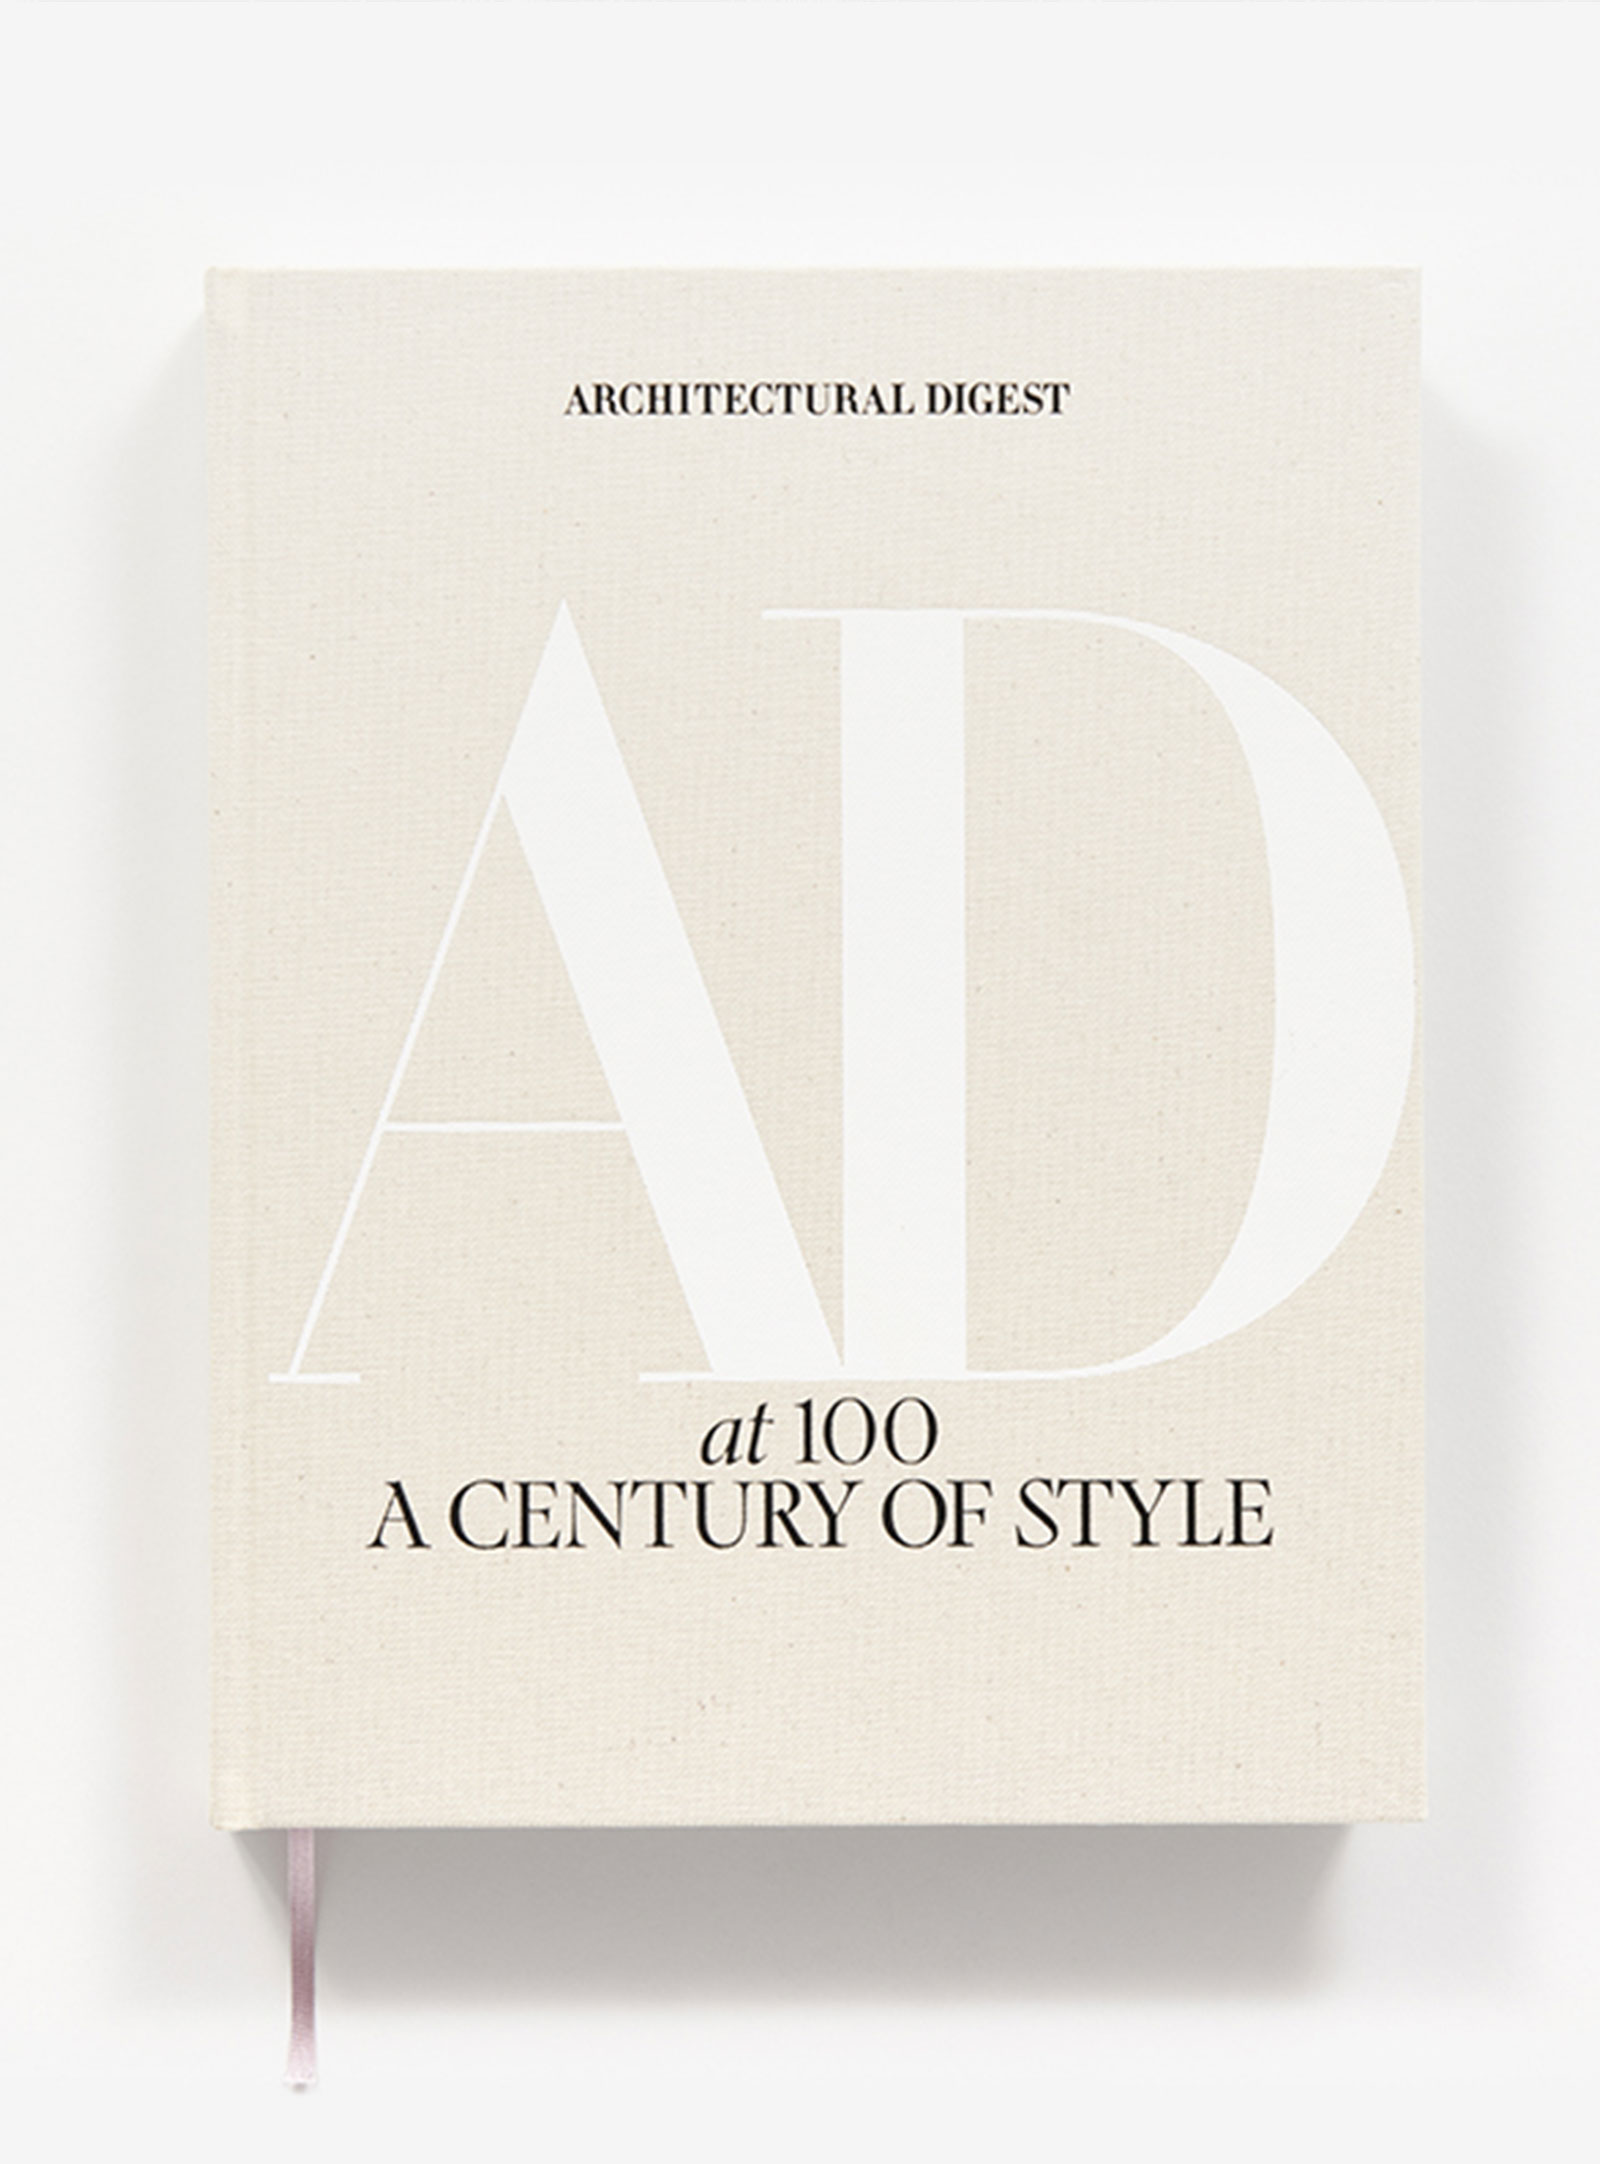 Architectural Digest at 100: A Century of Style Hardcover Book